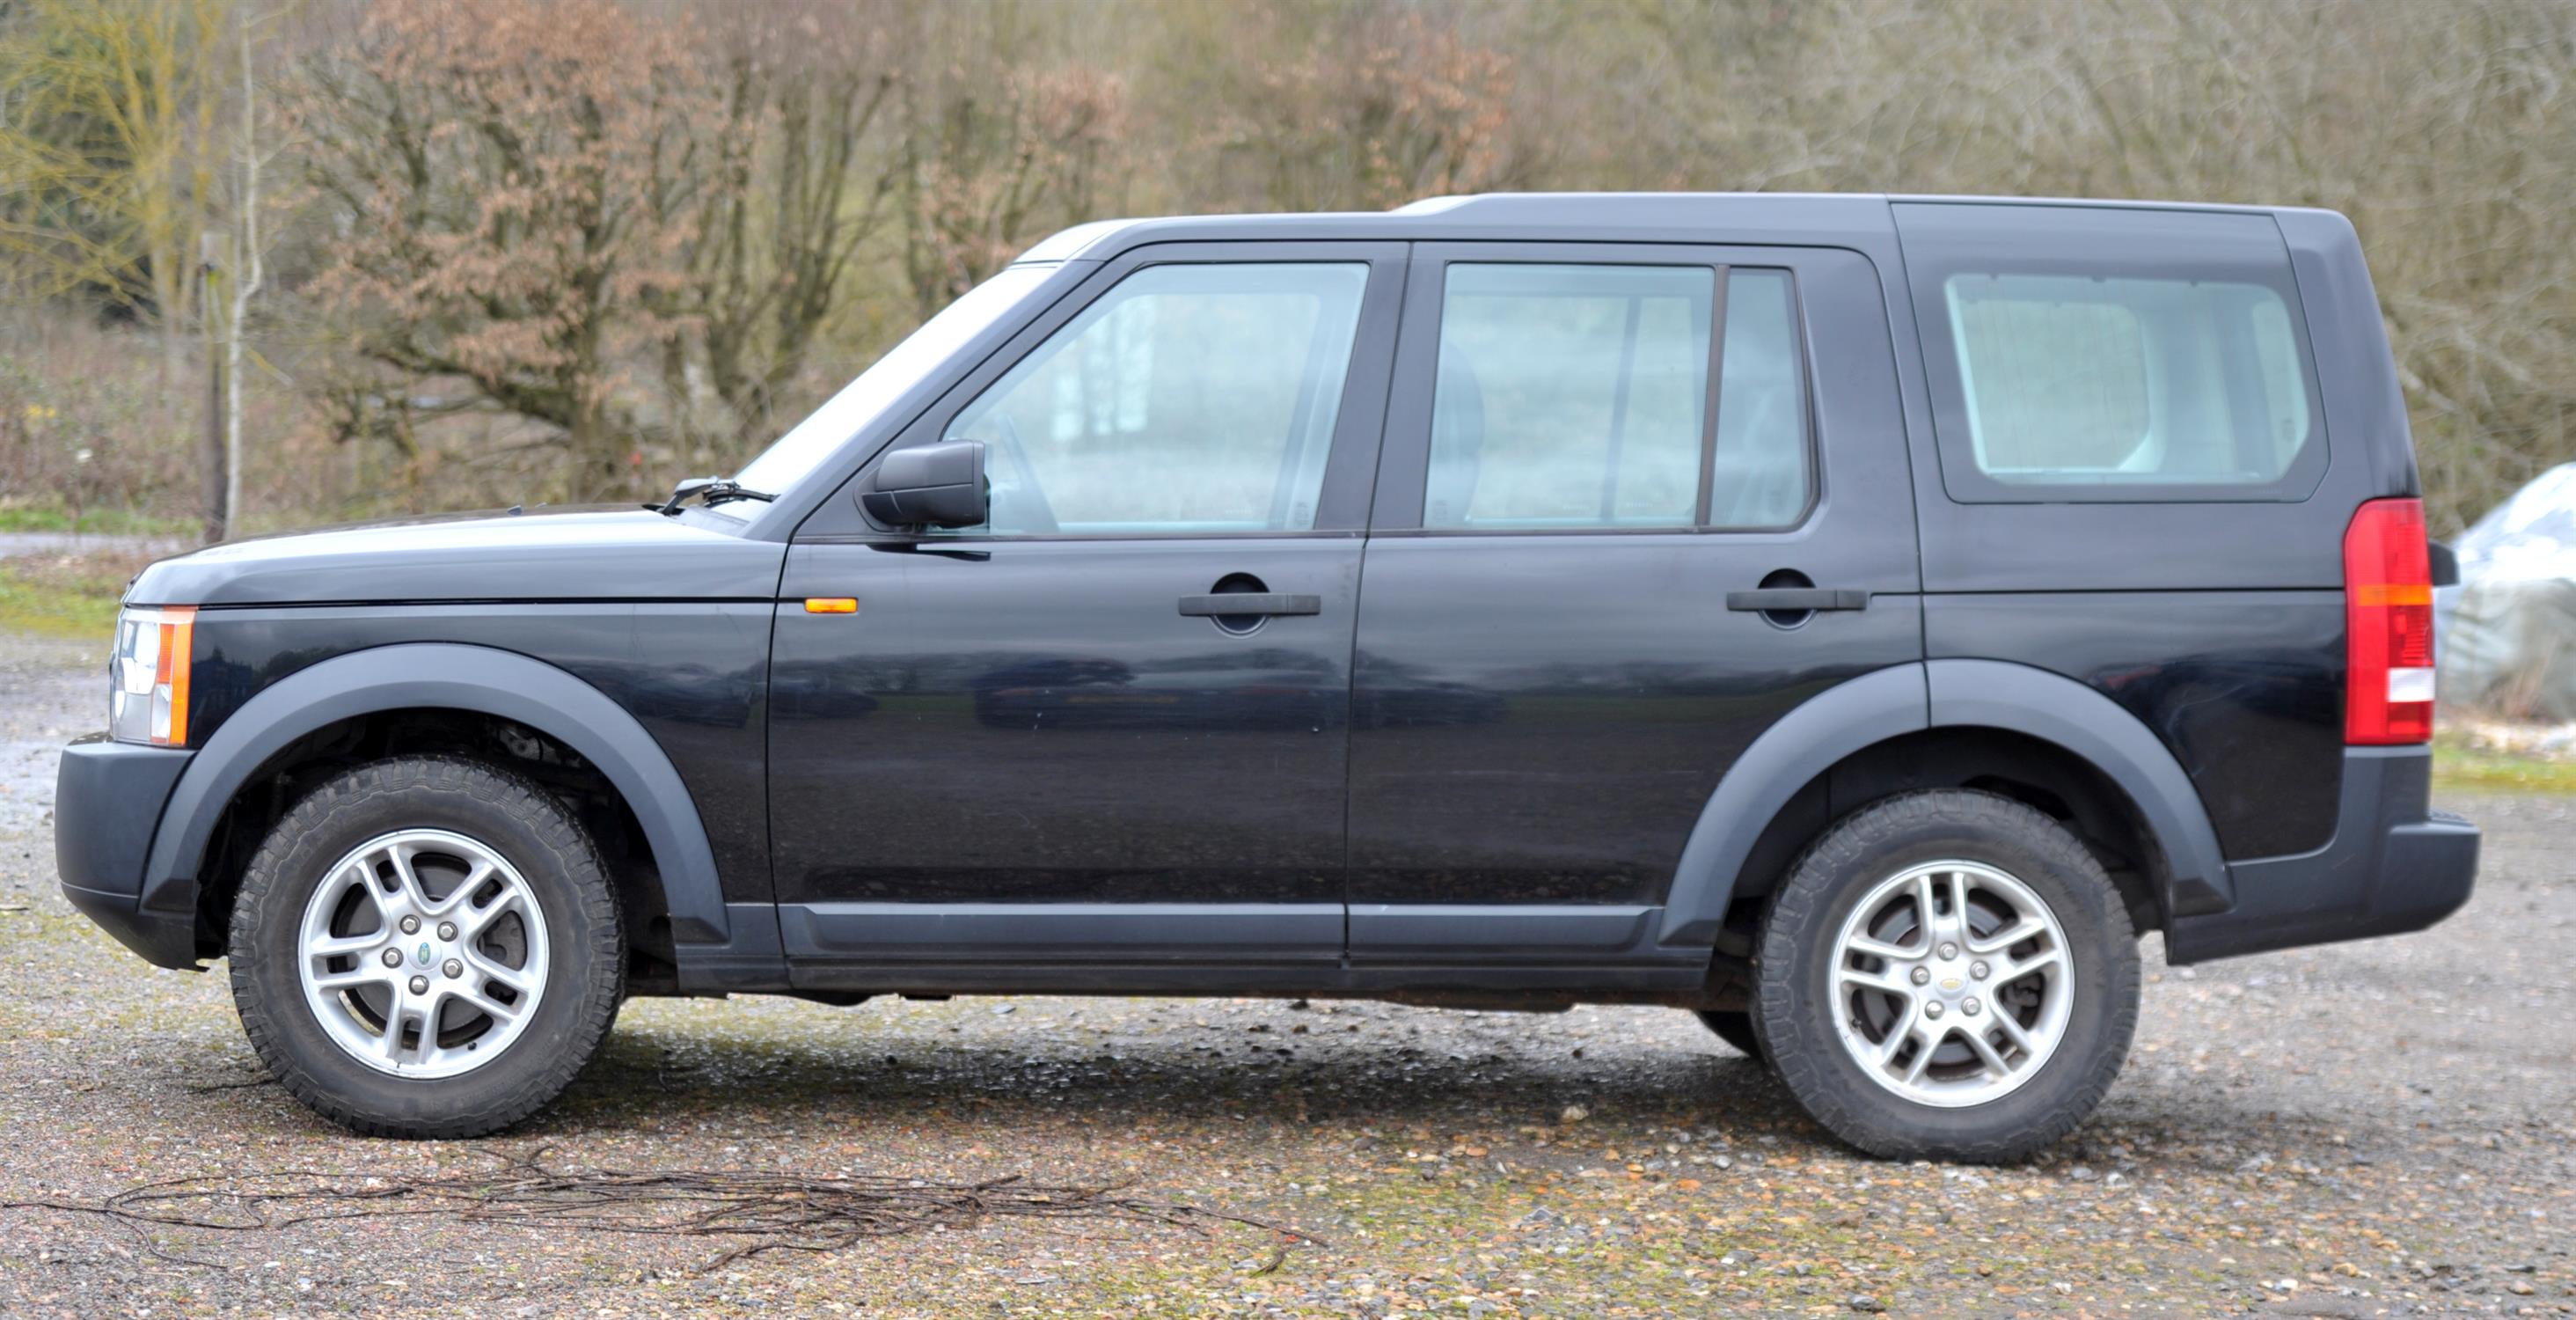 Land Rover Discovery 3 TDV6 Diesel 6 Speed Manual. Registration number: FP06 LAA. Mileage: 125,360. - Image 5 of 12